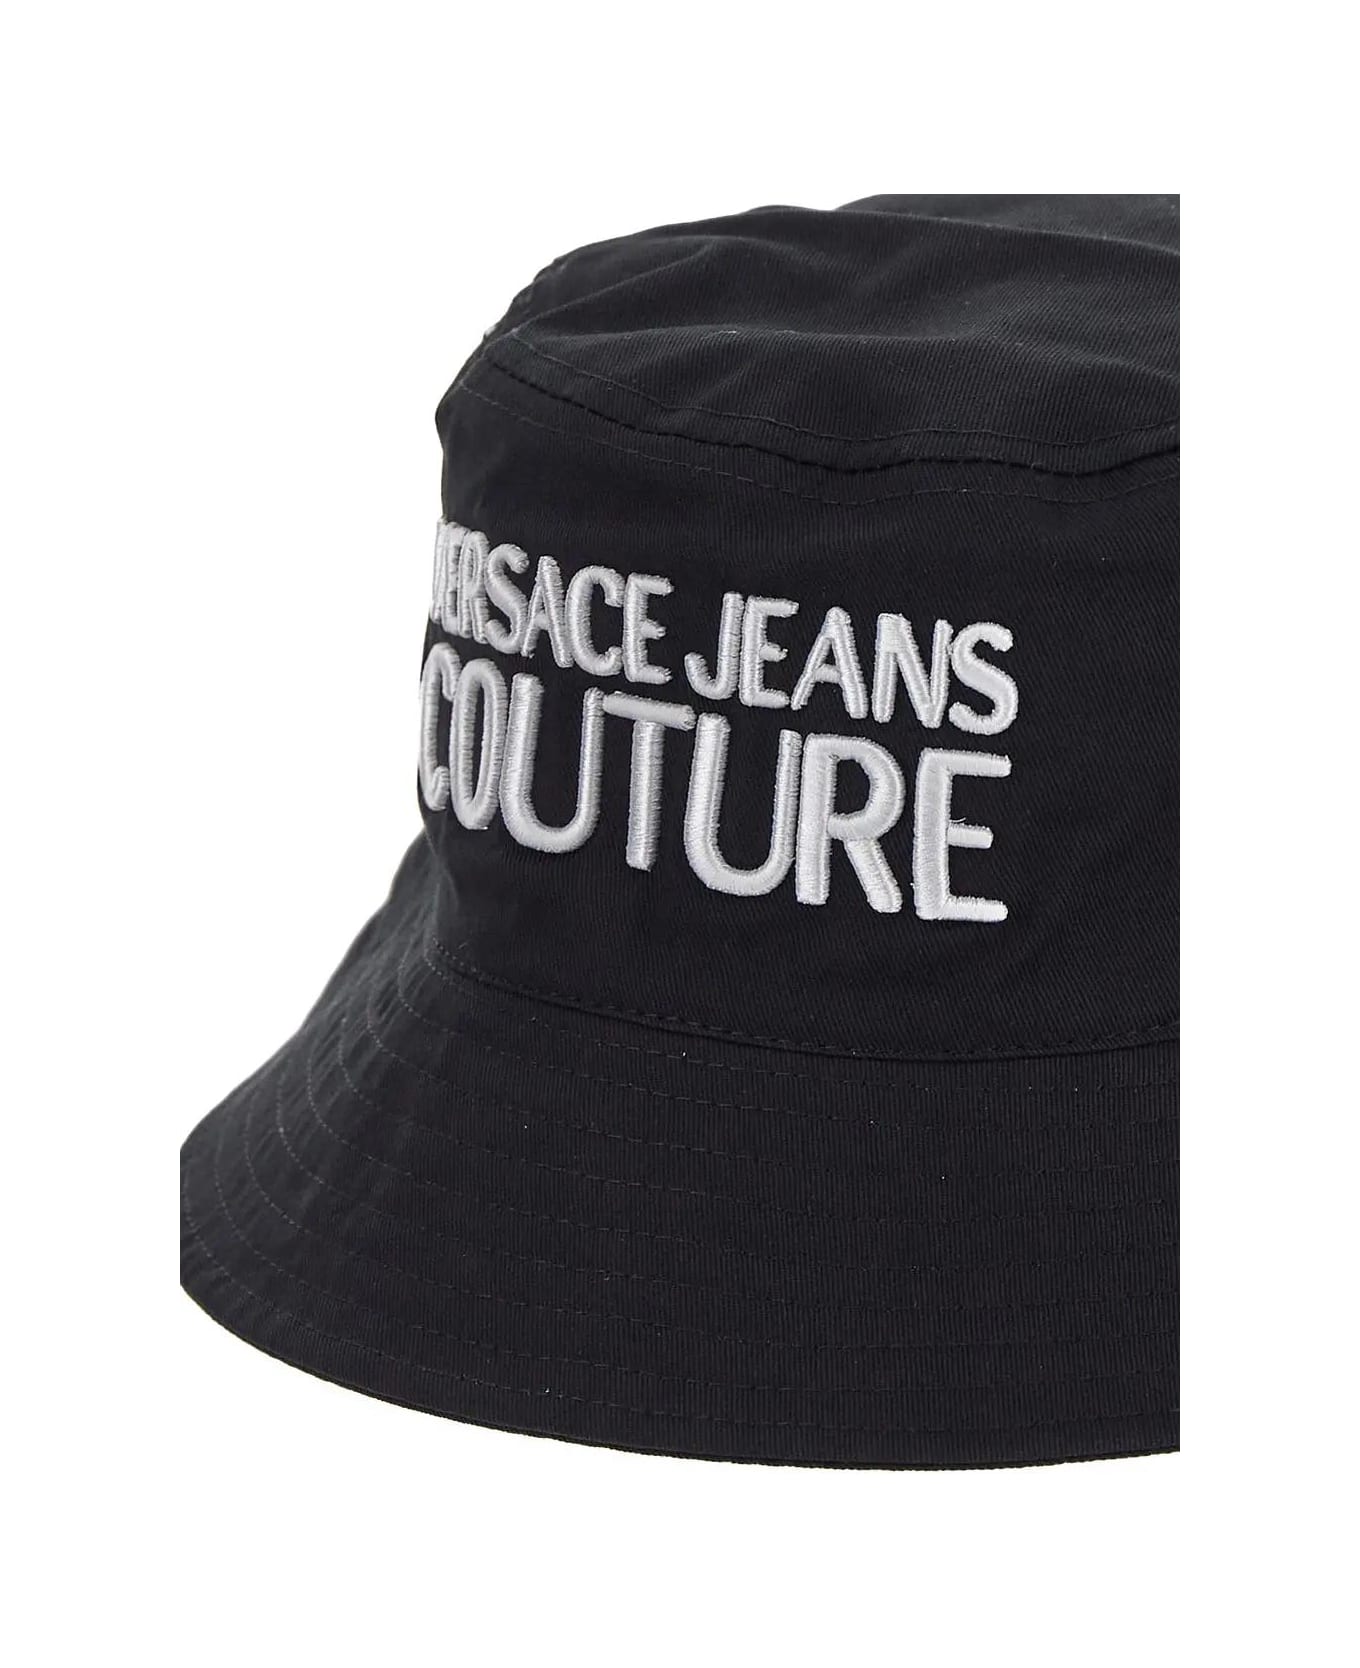 Versace Jeans Couture Hat - BLACK/WHITE